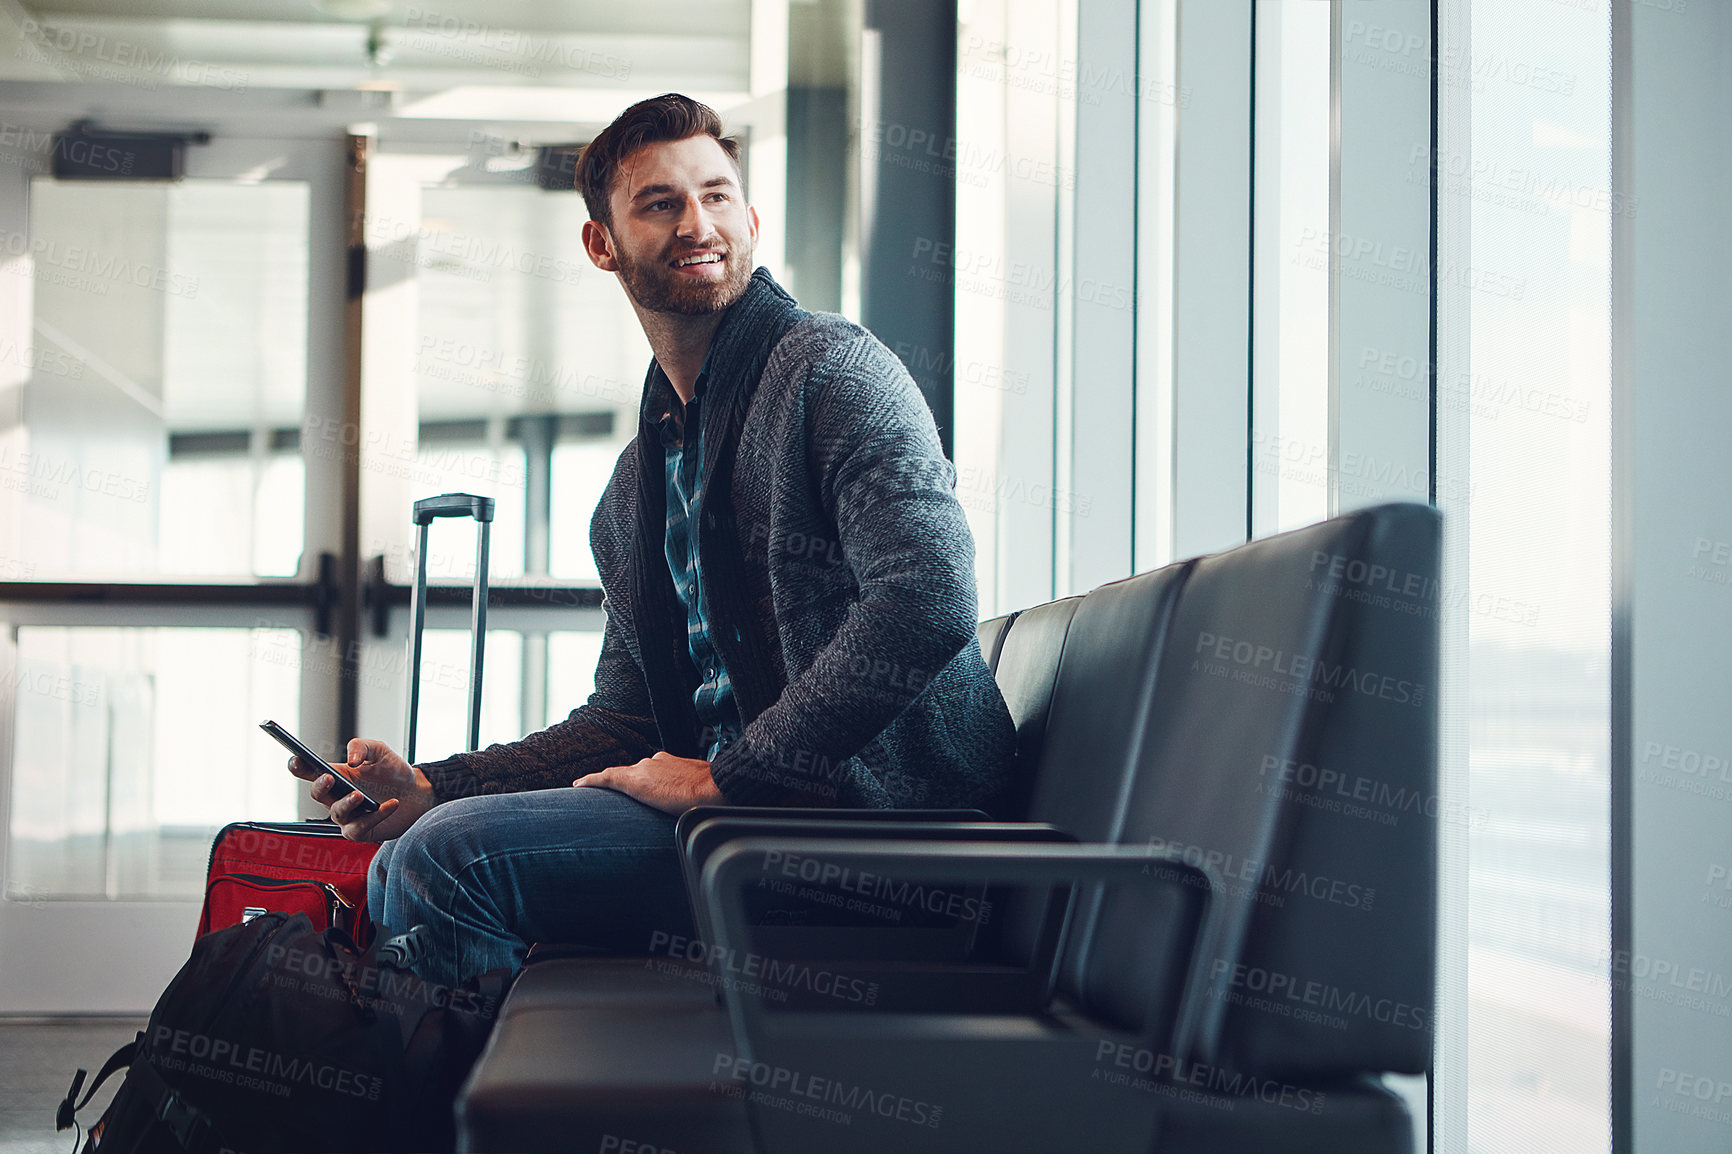 Buy stock photo Shot of a young man sitting in an airport with his luggage while holding his cellphone and looking at something